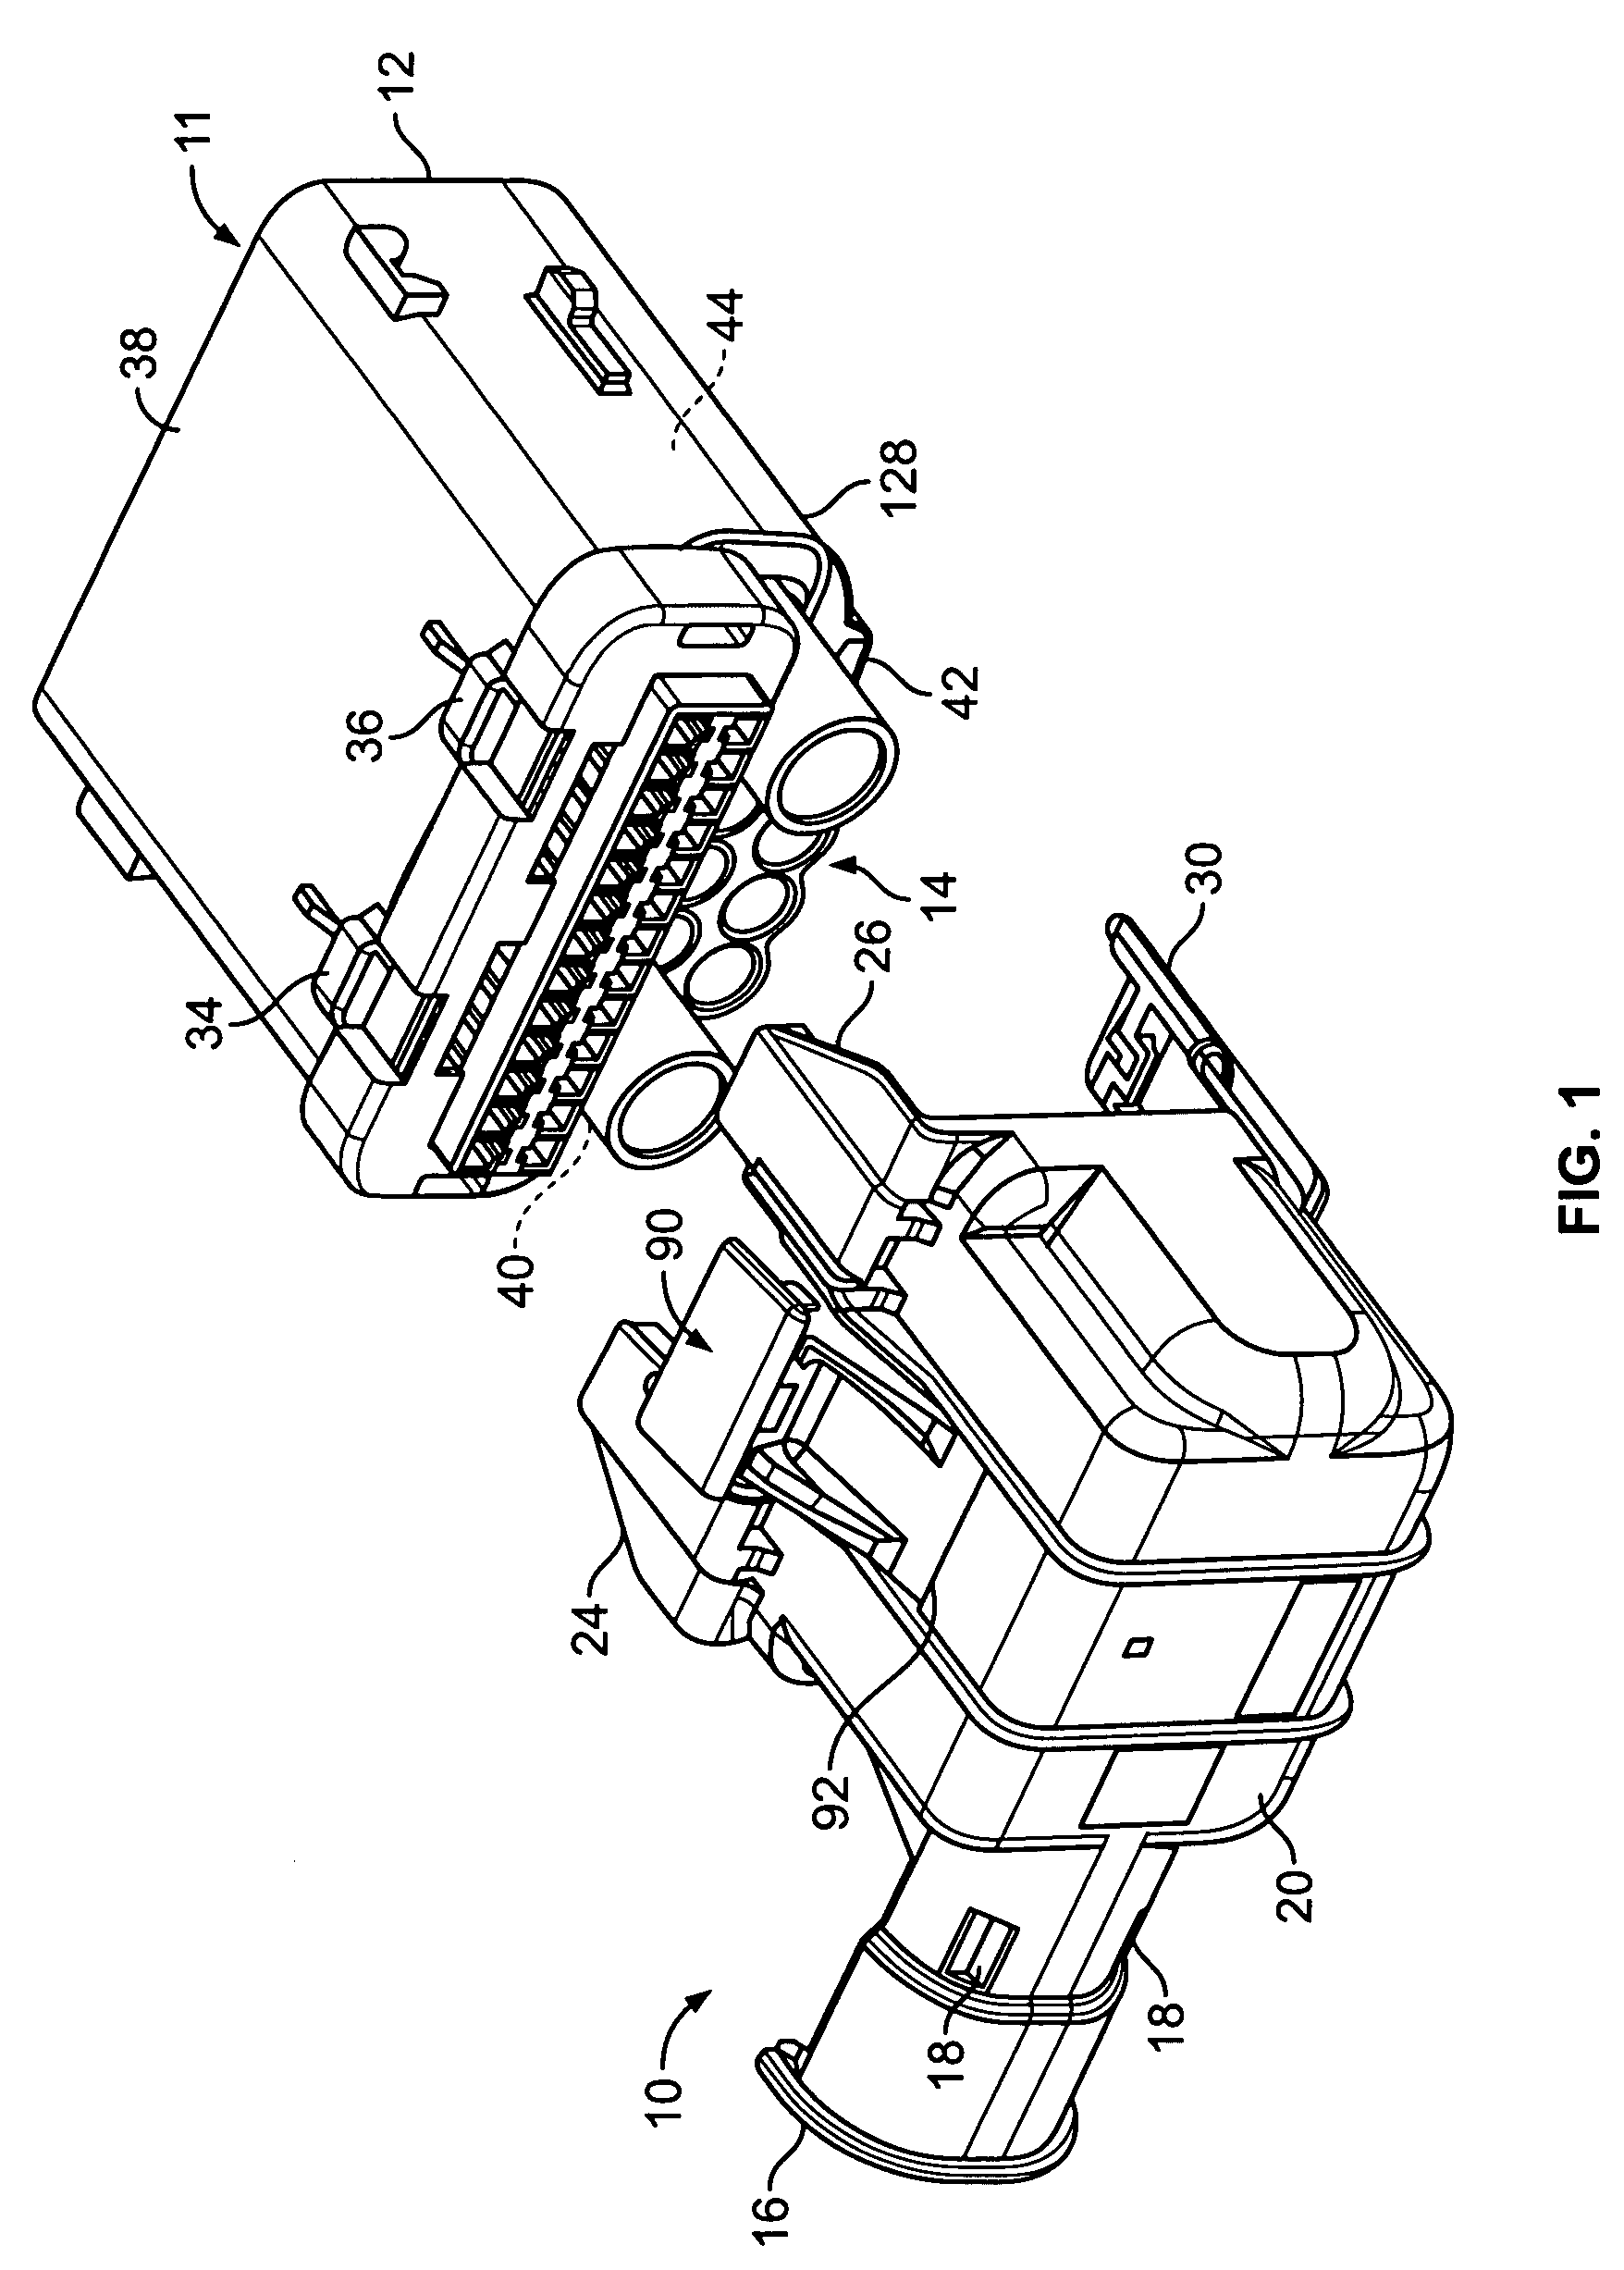 Electrical connector wire guide with hinged cam lock